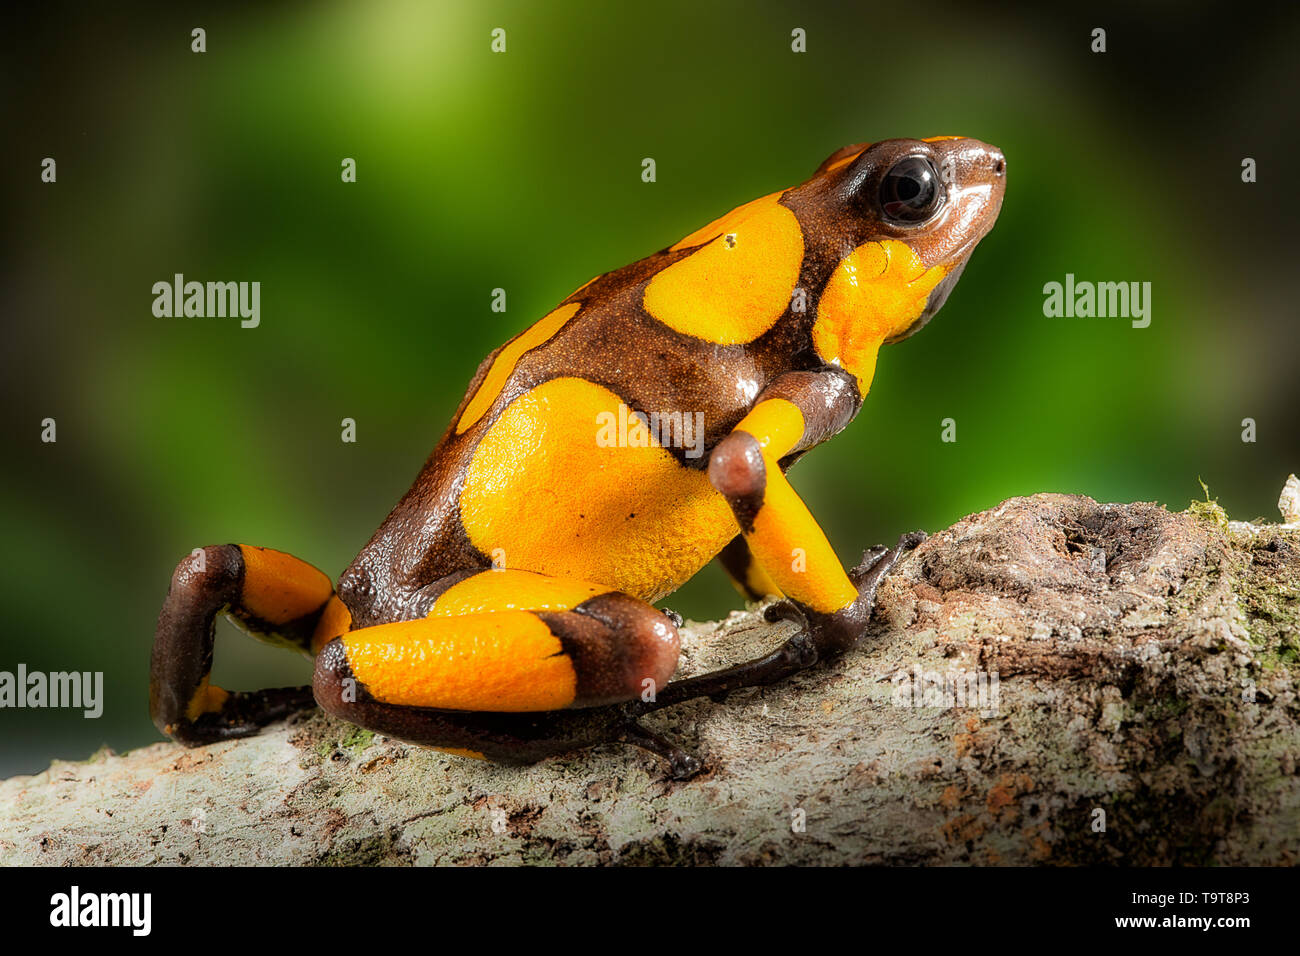 Poison dart frog, Oophaga histrionica. A small poisonous animal from the rain forest of Colombia. depicting bright yellow warning colors Stock Photo